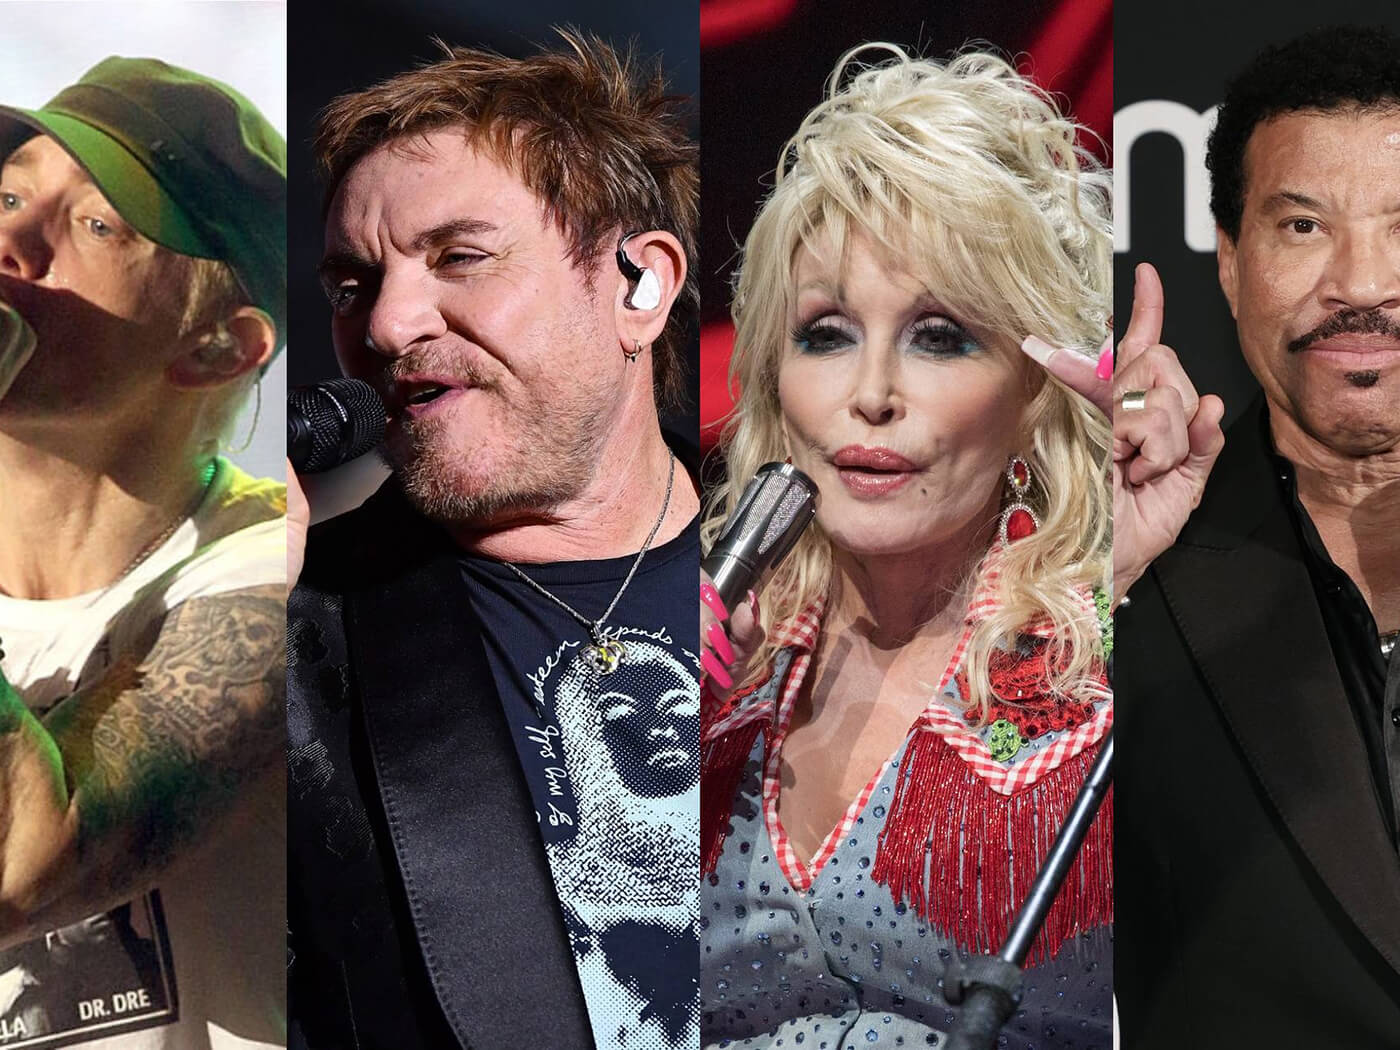 Eminem, Duran Duran, Dolly Parton and Lionel Richie to be inducted into Rock Hall 2022